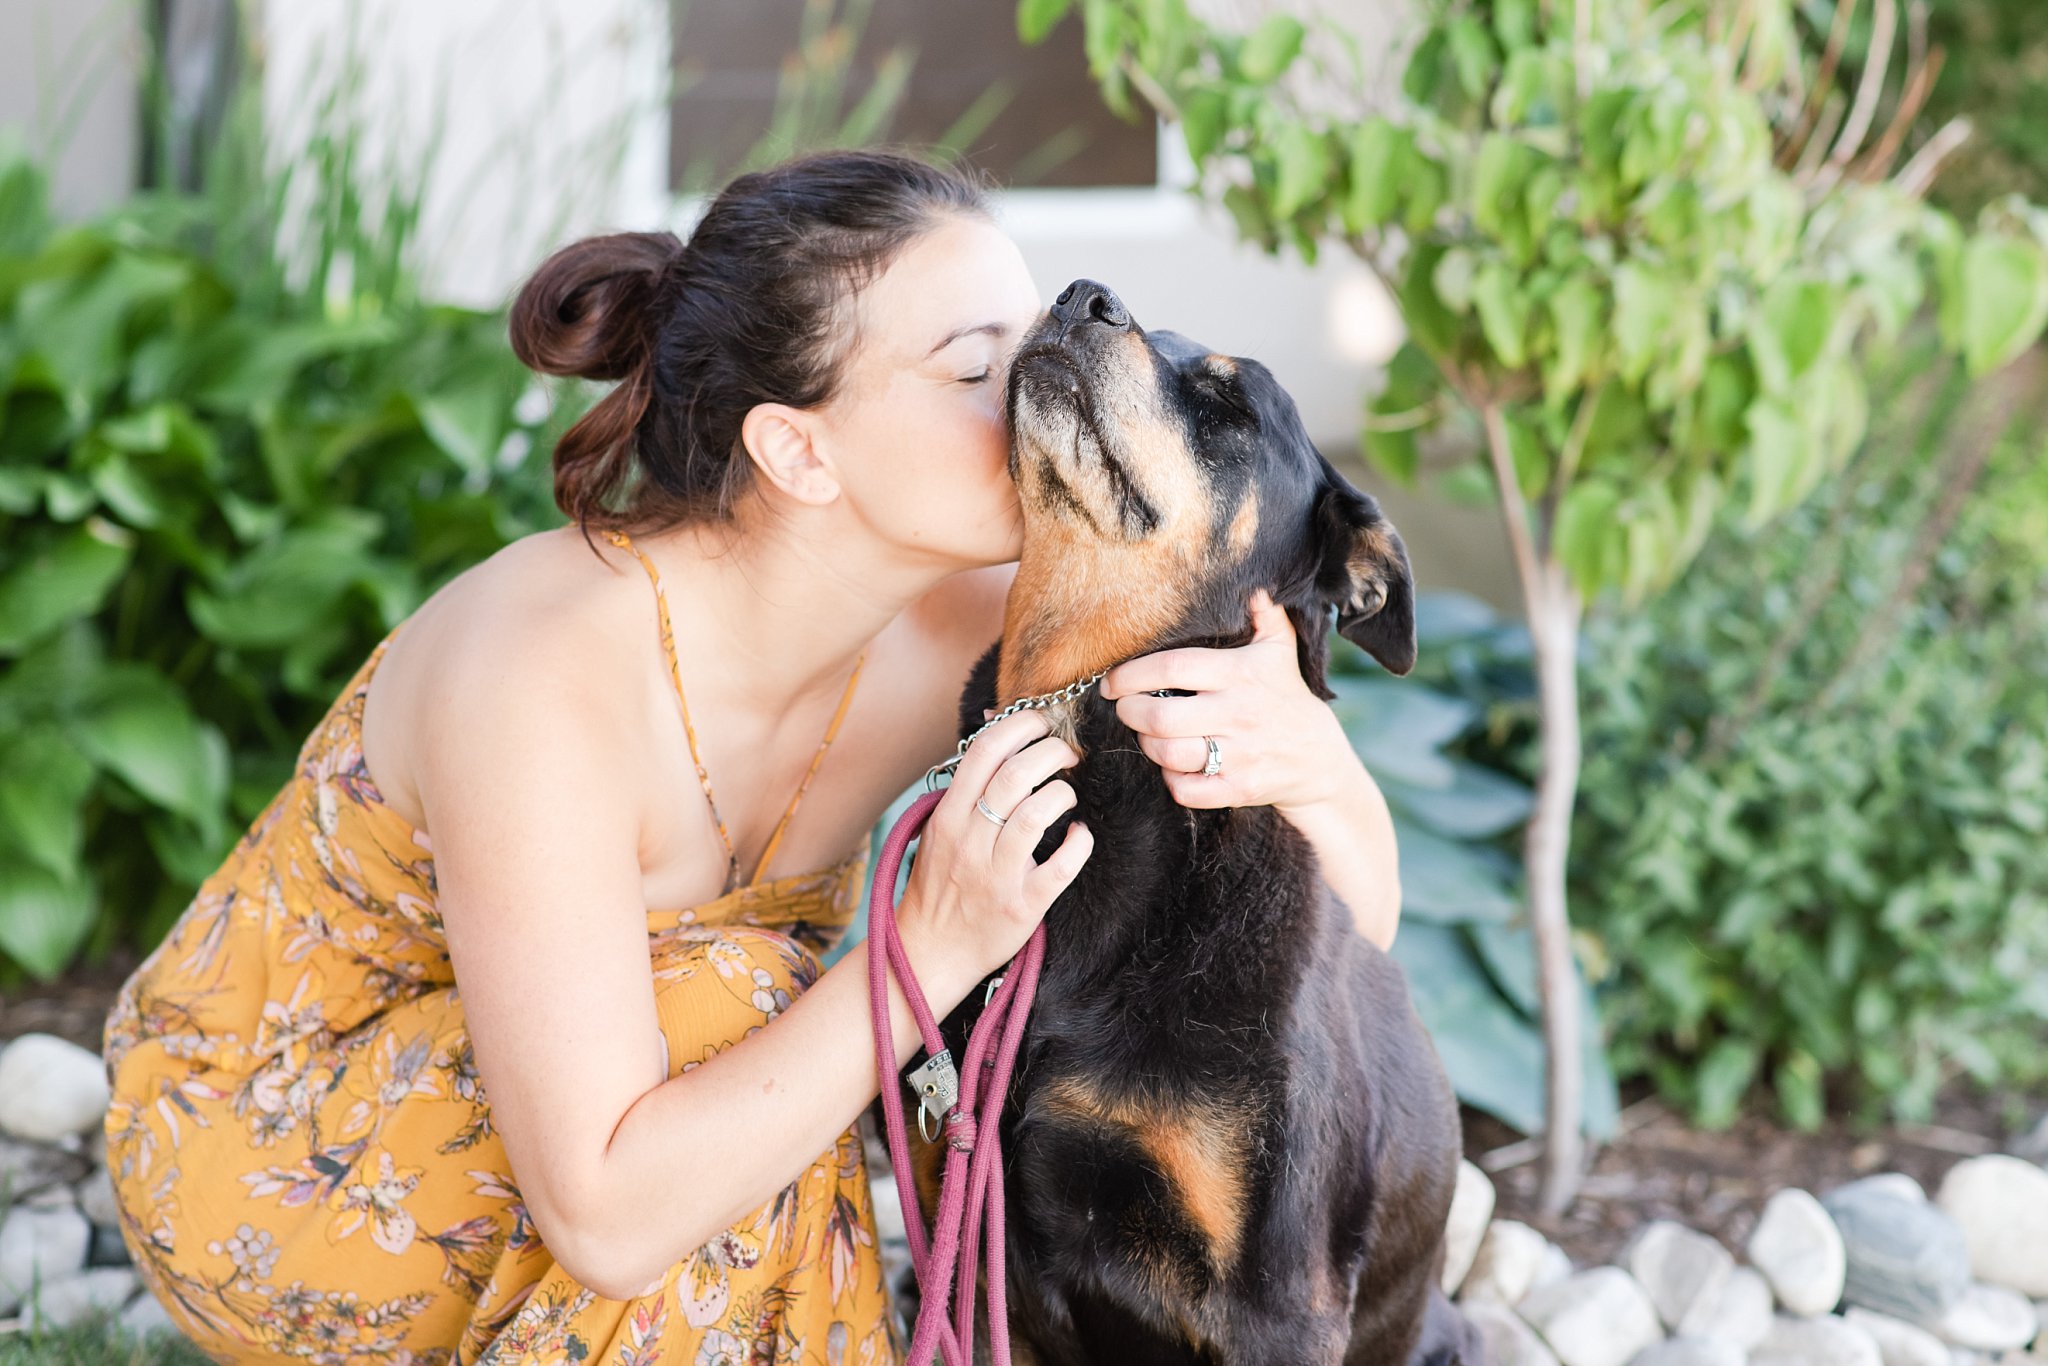 family photos in london ontario; woman kisses her dog